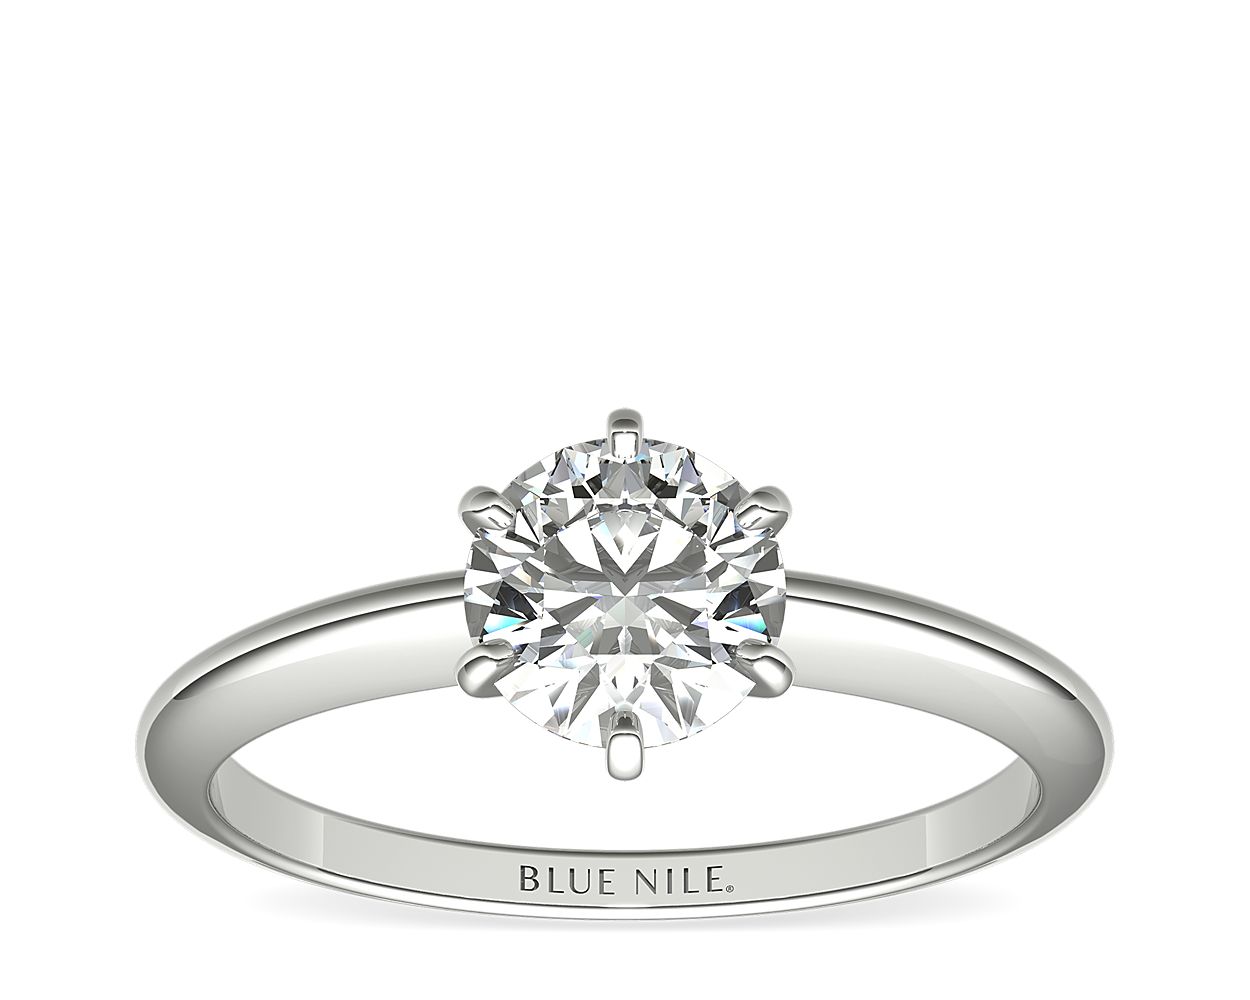 Classic Six-Prong Solitaire Engagement Ring in 14k White Gold | Blue Nile